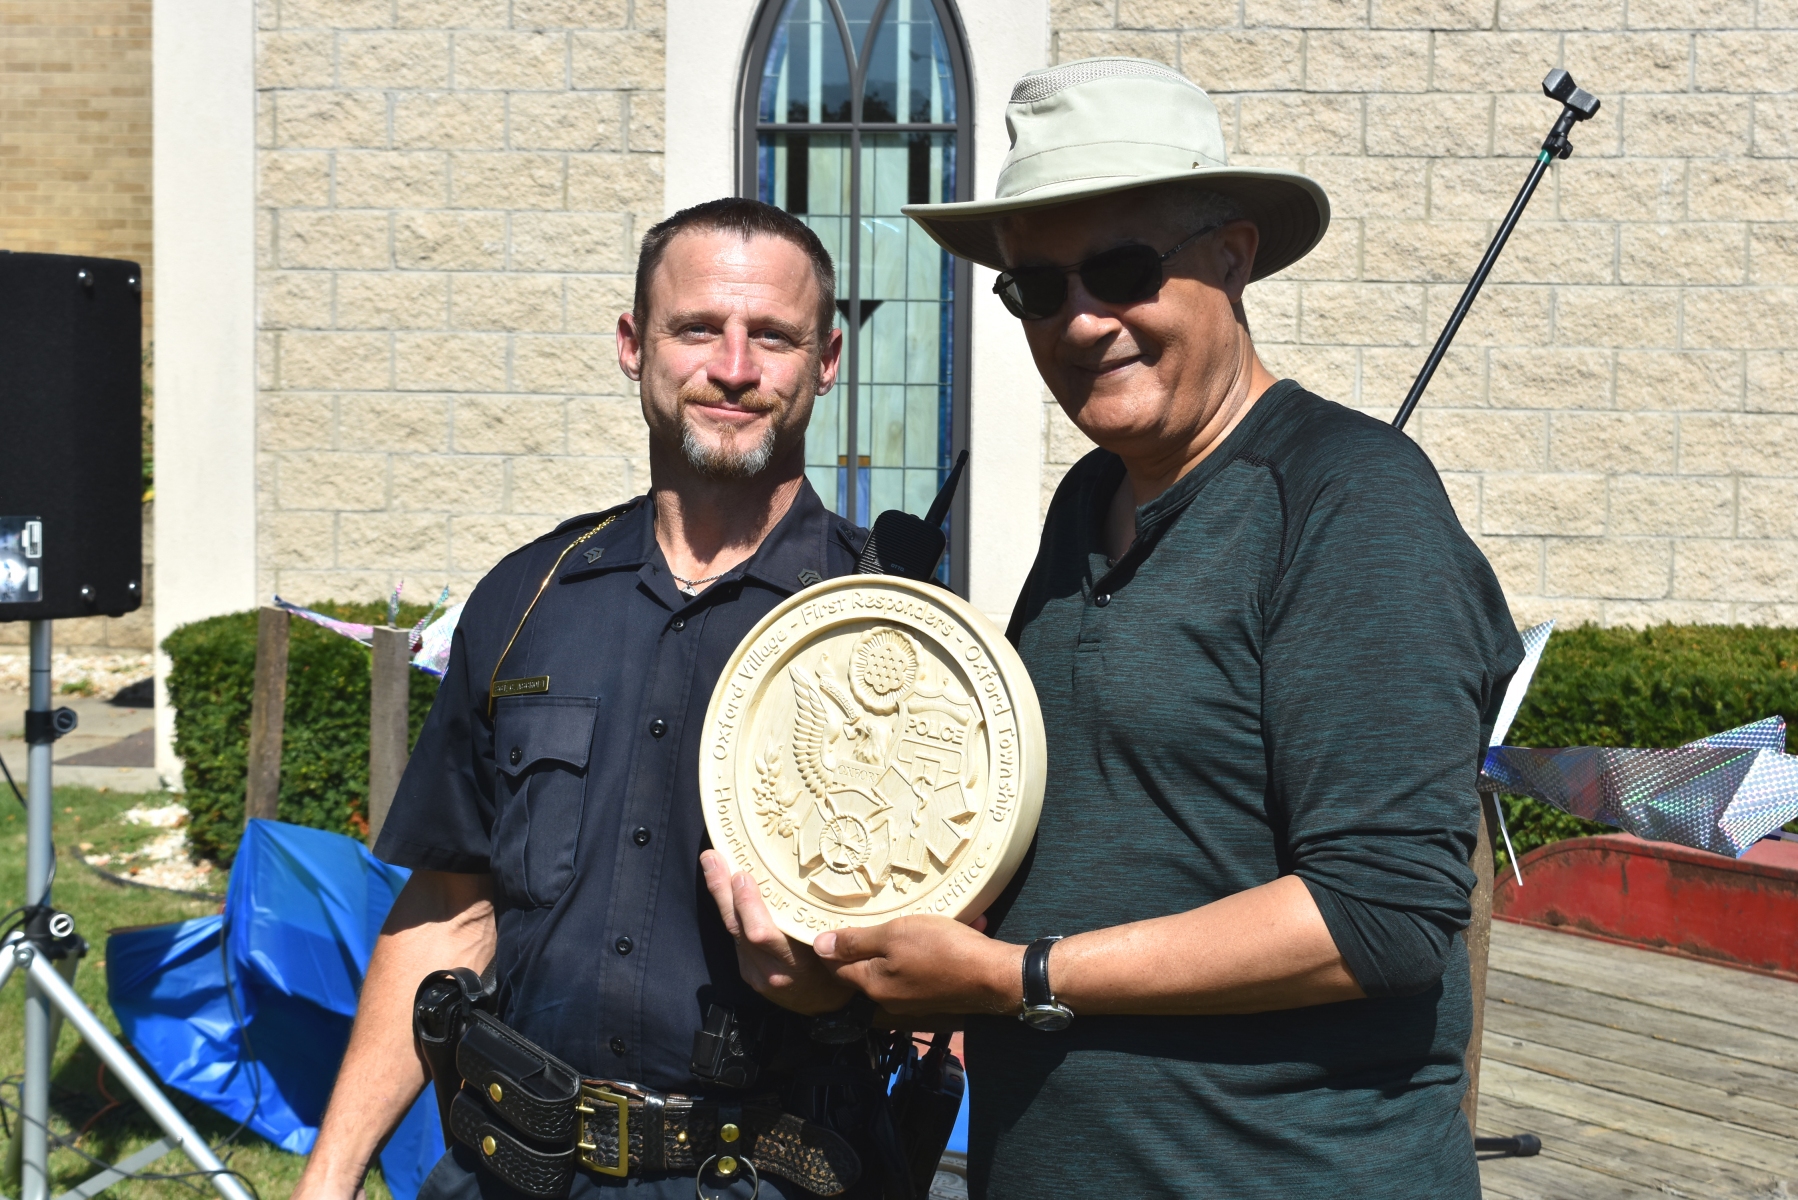 On-behalf-of-Oxford-Police-Department-Sgt.-Clint-Ascroft-accepts-an-engraved-plaque-from-Oxford-UMC-pastor-Julius-E.-Del-Pino.-Photo-by-J.-Hanlon.